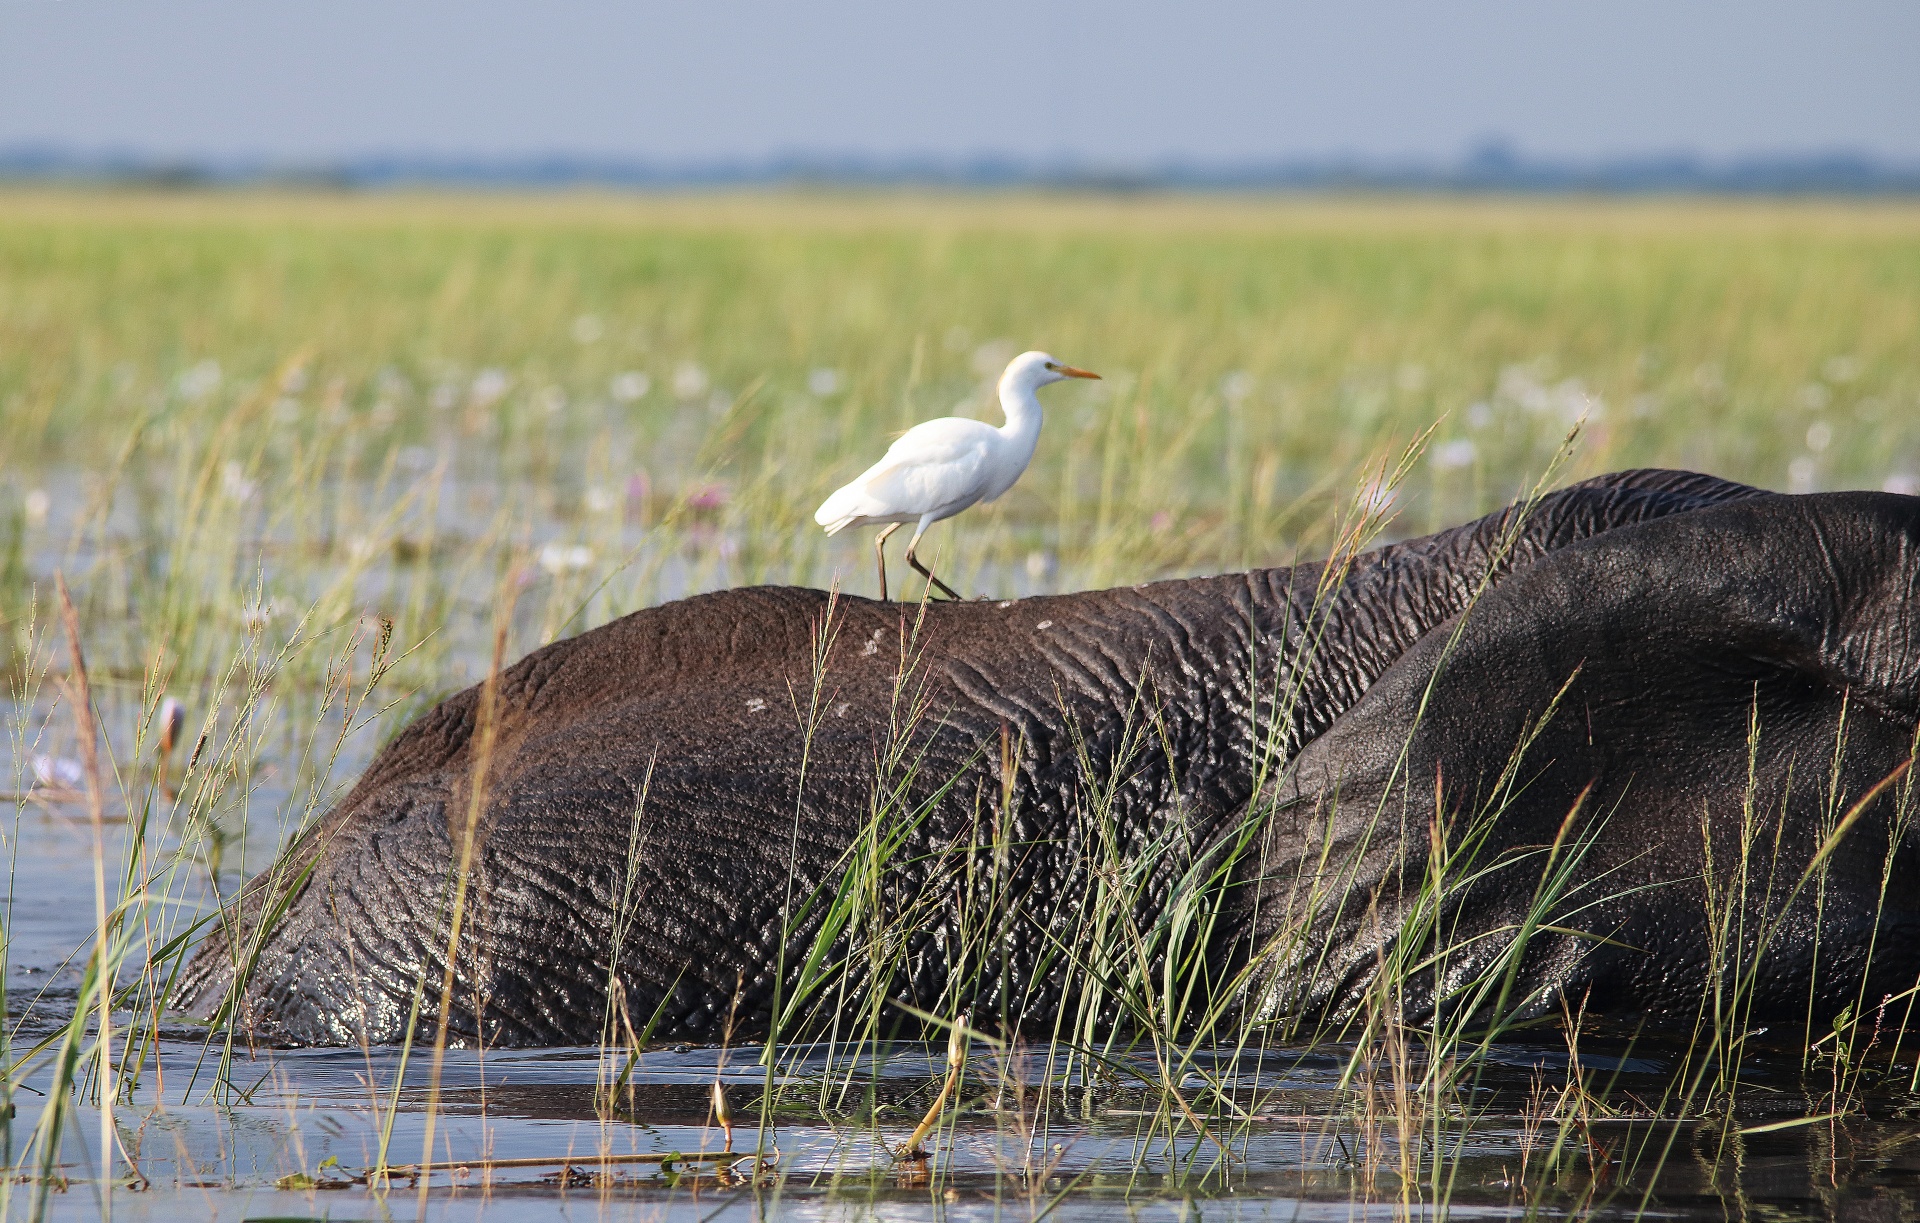 White Egret On An African Elephant